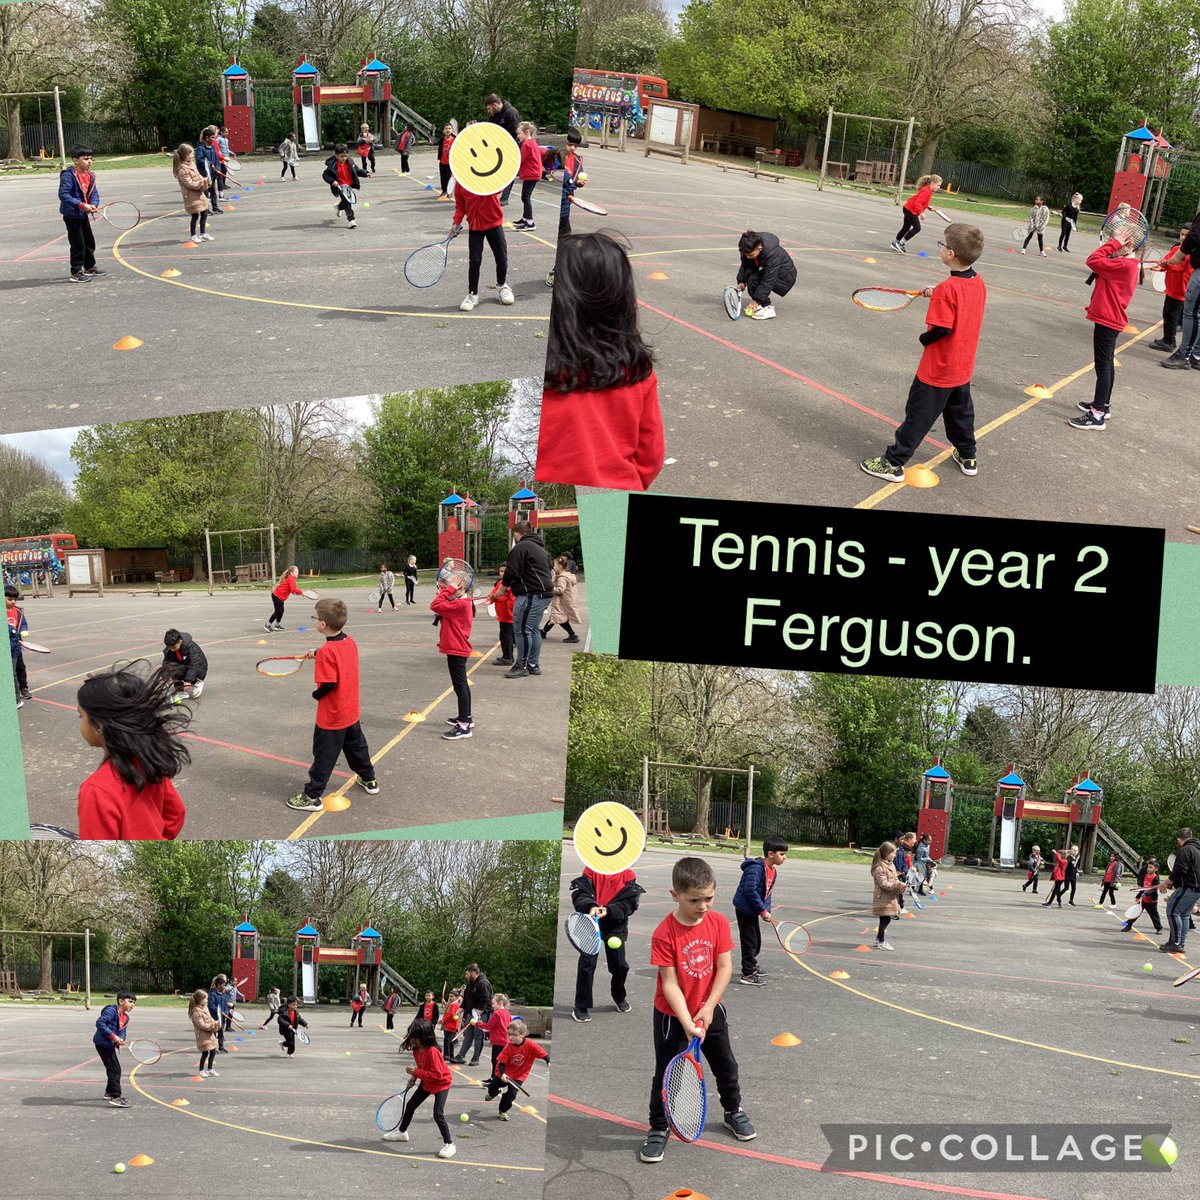 Tennis skills are improving well for year two Ferguson. Today they began rallying with a partner.